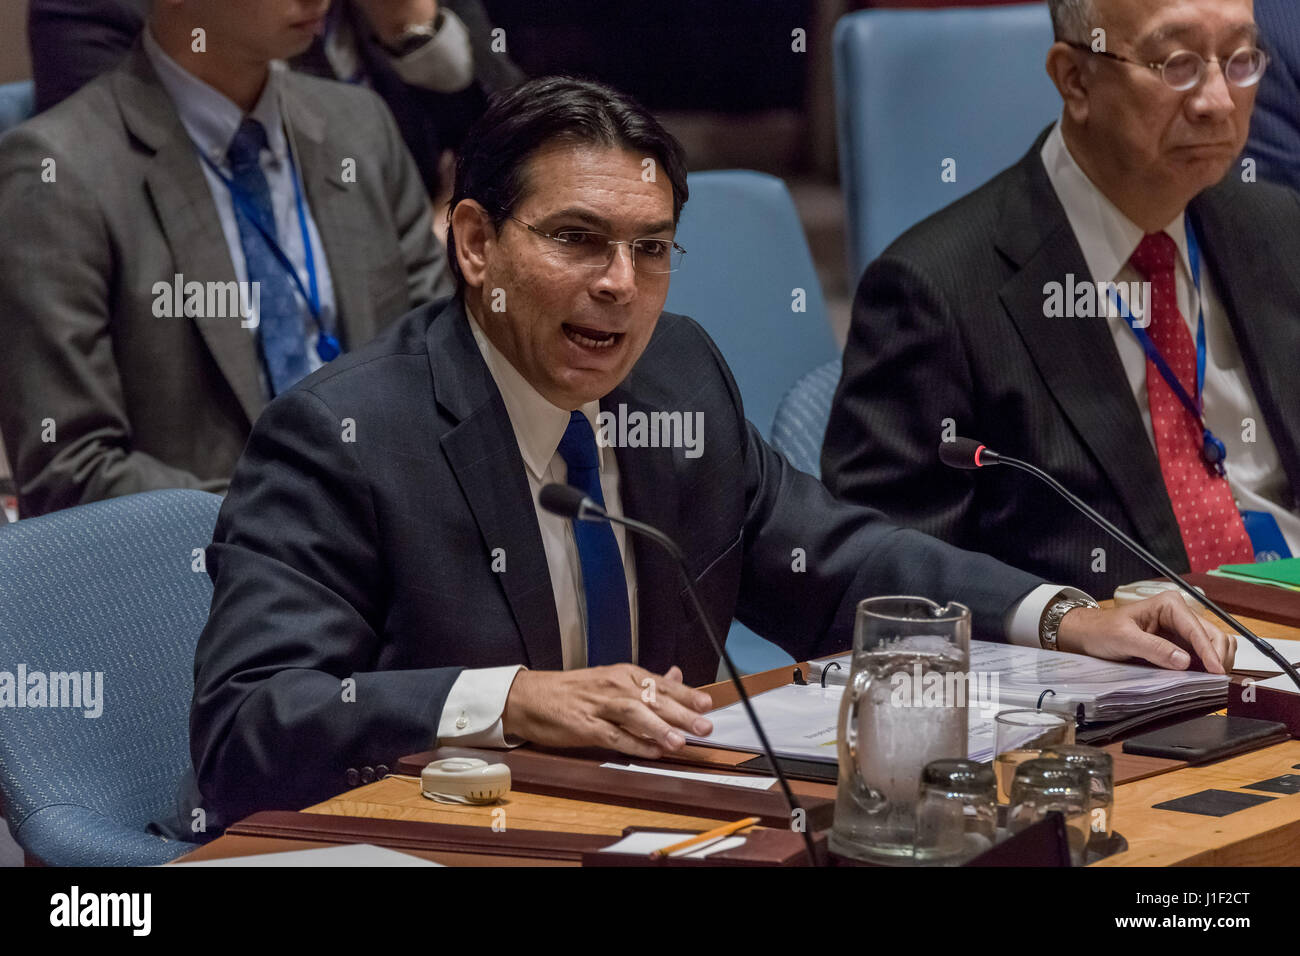 New York, USA. 20th Apr, 2017. Israeli Permanent Representative to the UN Ambassador Danny Danon is seen addressing the Council. The United Nations Security Council convened an open debate on the 'the situation in the Middle East, including the Palestinian question.” At the debate preside over by US Ambassador to the UN Nikki Haley, Council members heard a briefing from Nikolay Mladenov, the UN Special Coordinator for the Middle East Peace Process. Though monthly meetings on Palestine are a standard item in the Council's programme, upon assuming Presidency of the Council at the beginning of Ma Stock Photo